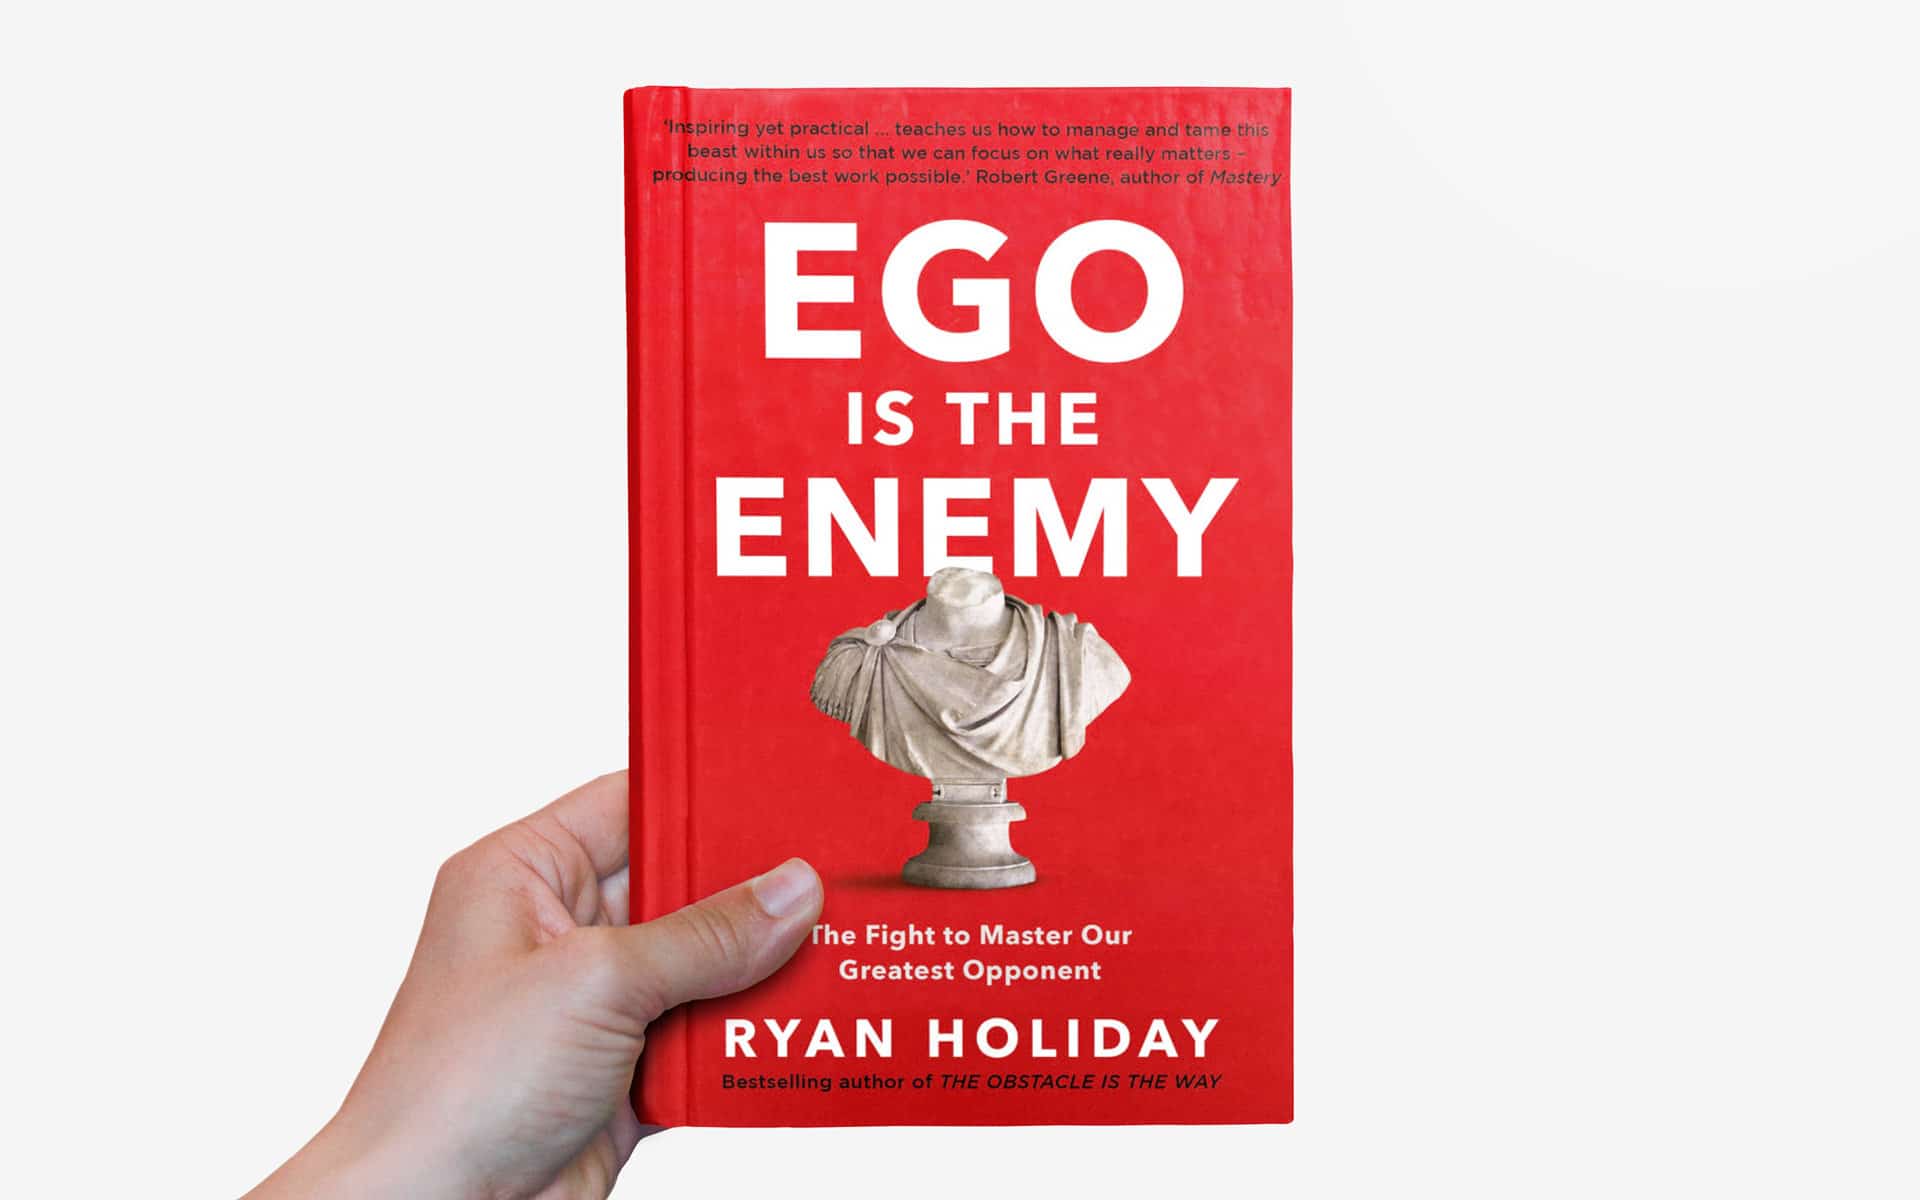 ego is the enemy audio book